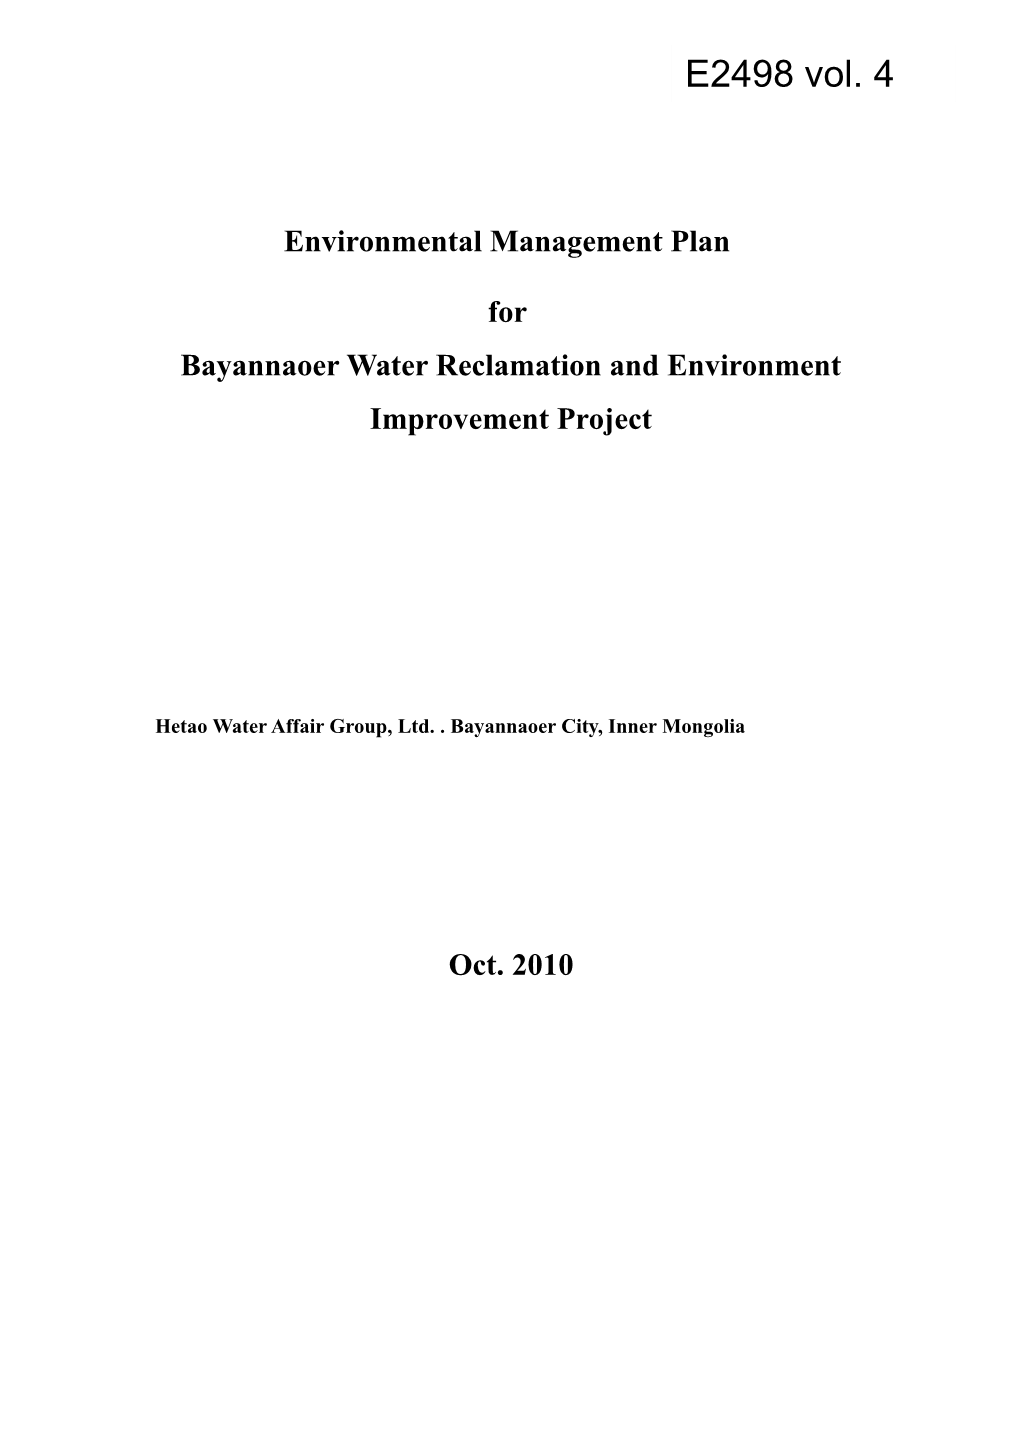 Bayannaoer Water Reclamation and Environment Improvement Project